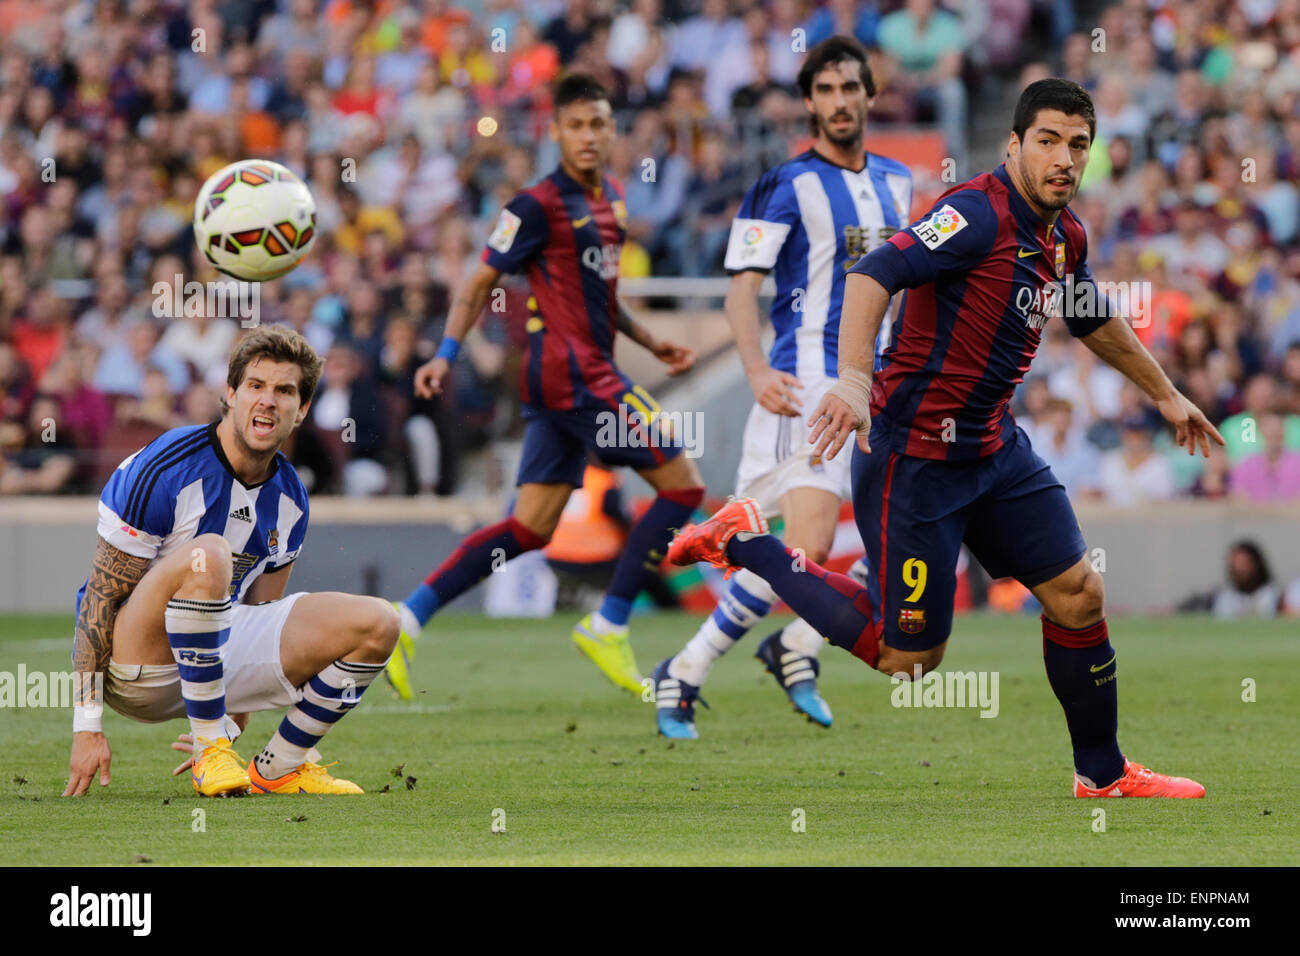 Barcelona, Spain. 9th May, 2015. FC Barcelona's Luis Suarez (1st R) competes during the La Liga soccer match against Real Sociedad at Camp Nou Stadium in Barcelona, Spain, May 9, 2015. FC Barcelona won 2-0. Credit:  Pau Barrena/Xinhua/Alamy Live News Stock Photo